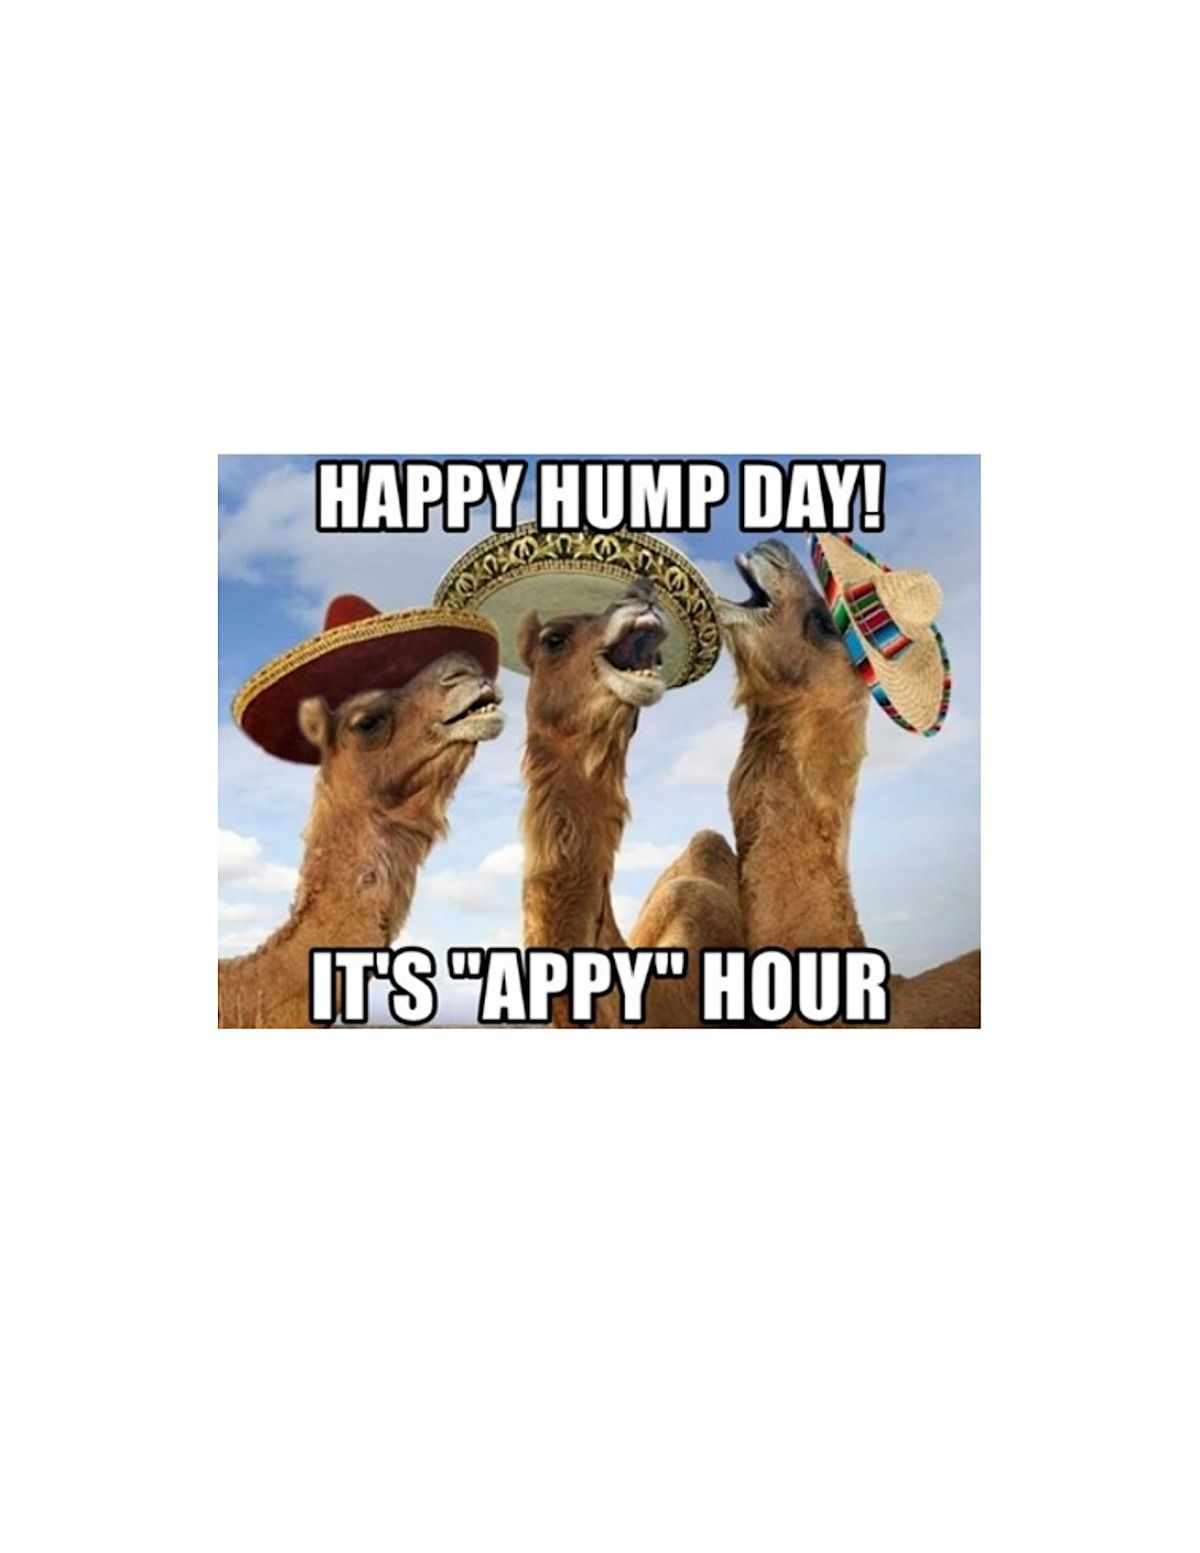 Quarterly Hump Day Happy Hour